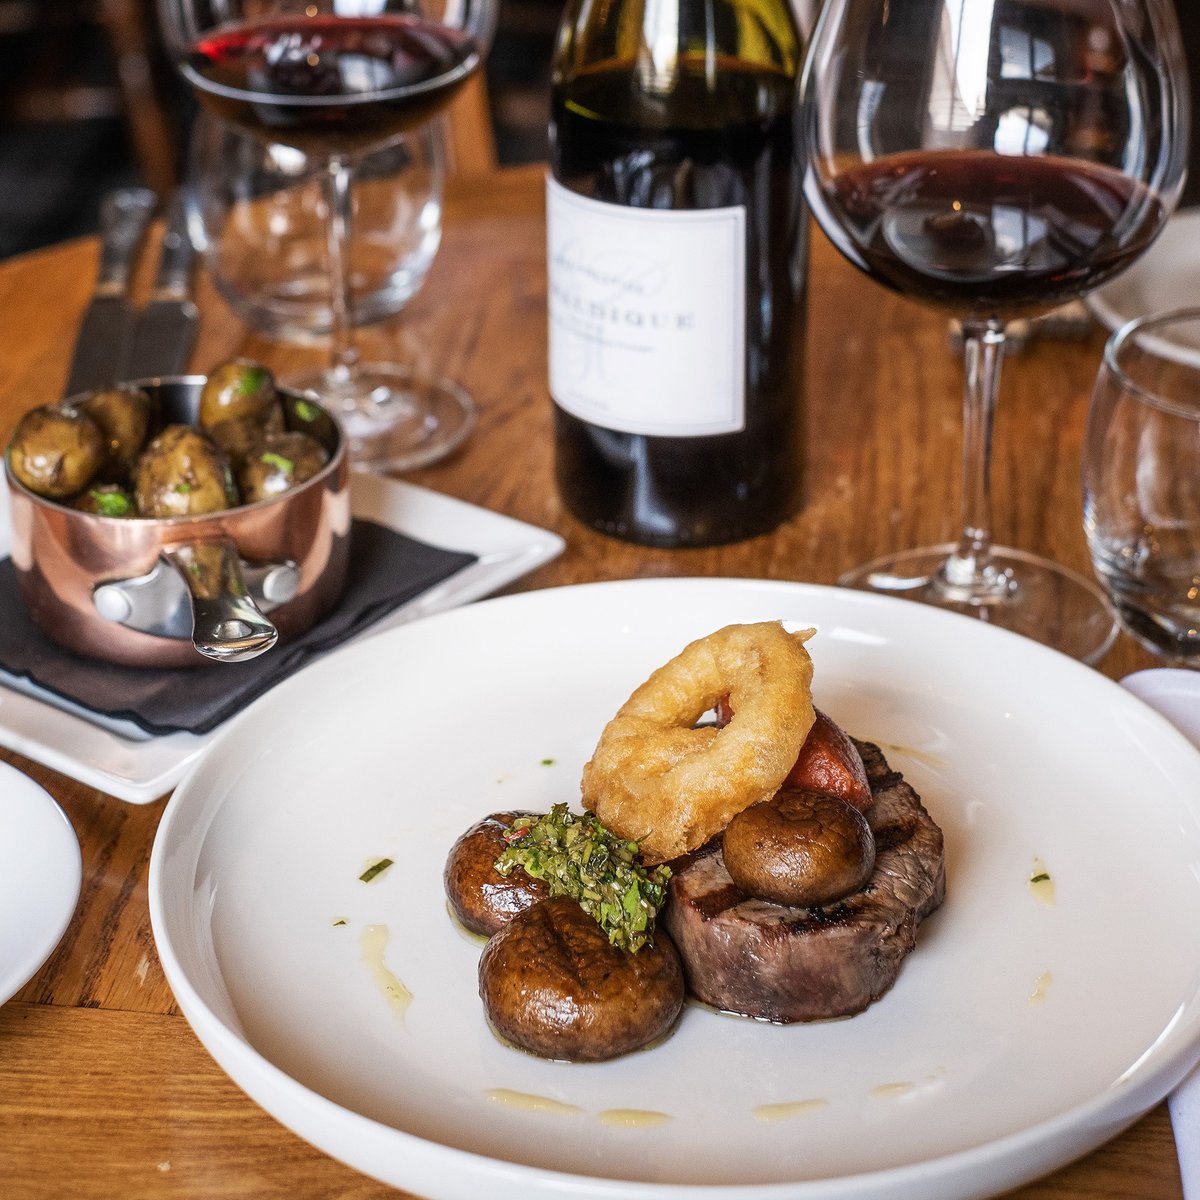 If you're staying with us try this out. Fillet steak, garlic mushrooms, potato terrine & onion rings with a side of beef dripping new potatoes and a nice glass of red. #foodies #staycation #burystedmunds #suffolk #fornhamallsaints 😘